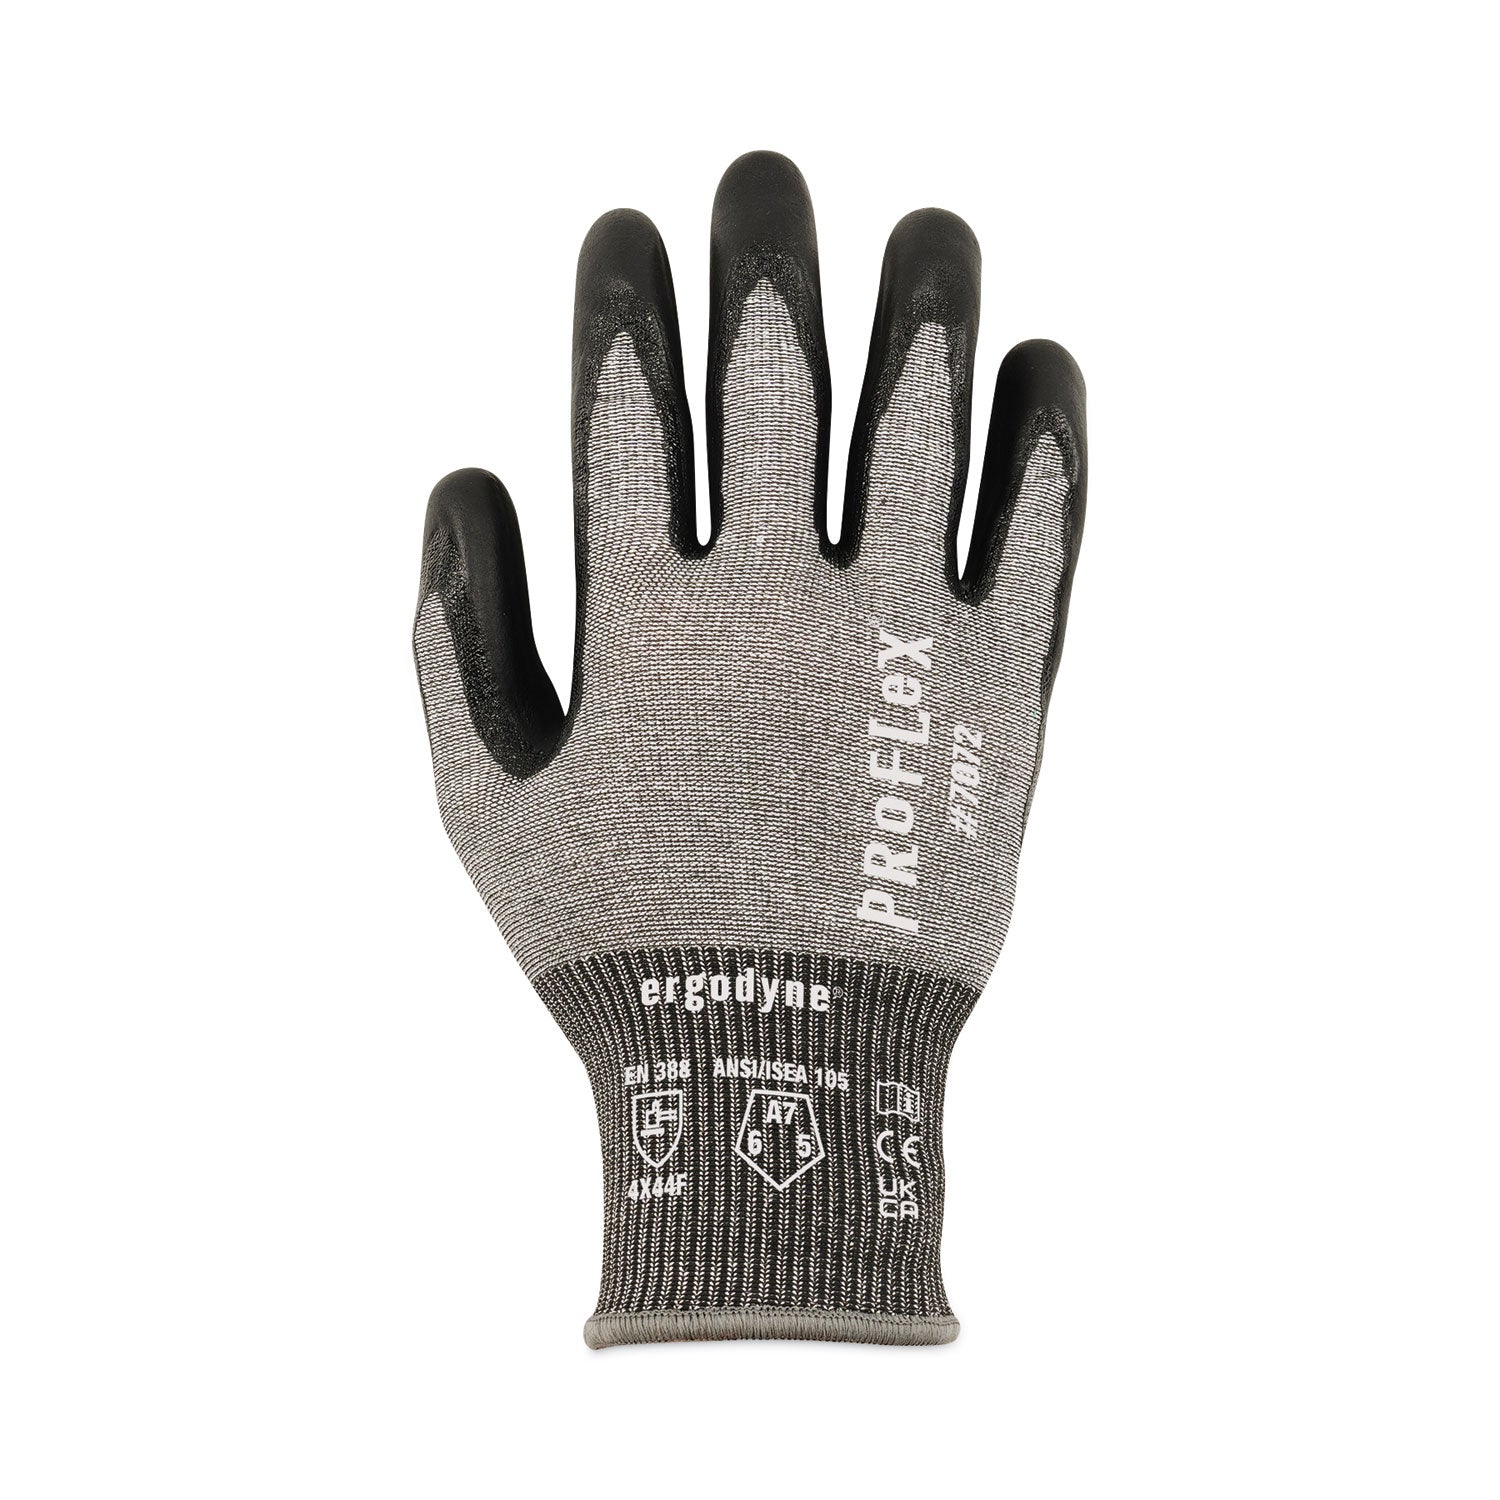 proflex-7072-ansi-a7-nitrile-coated-cr-gloves-gray-medium-pair-ships-in-1-3-business-days_ego10313 - 3